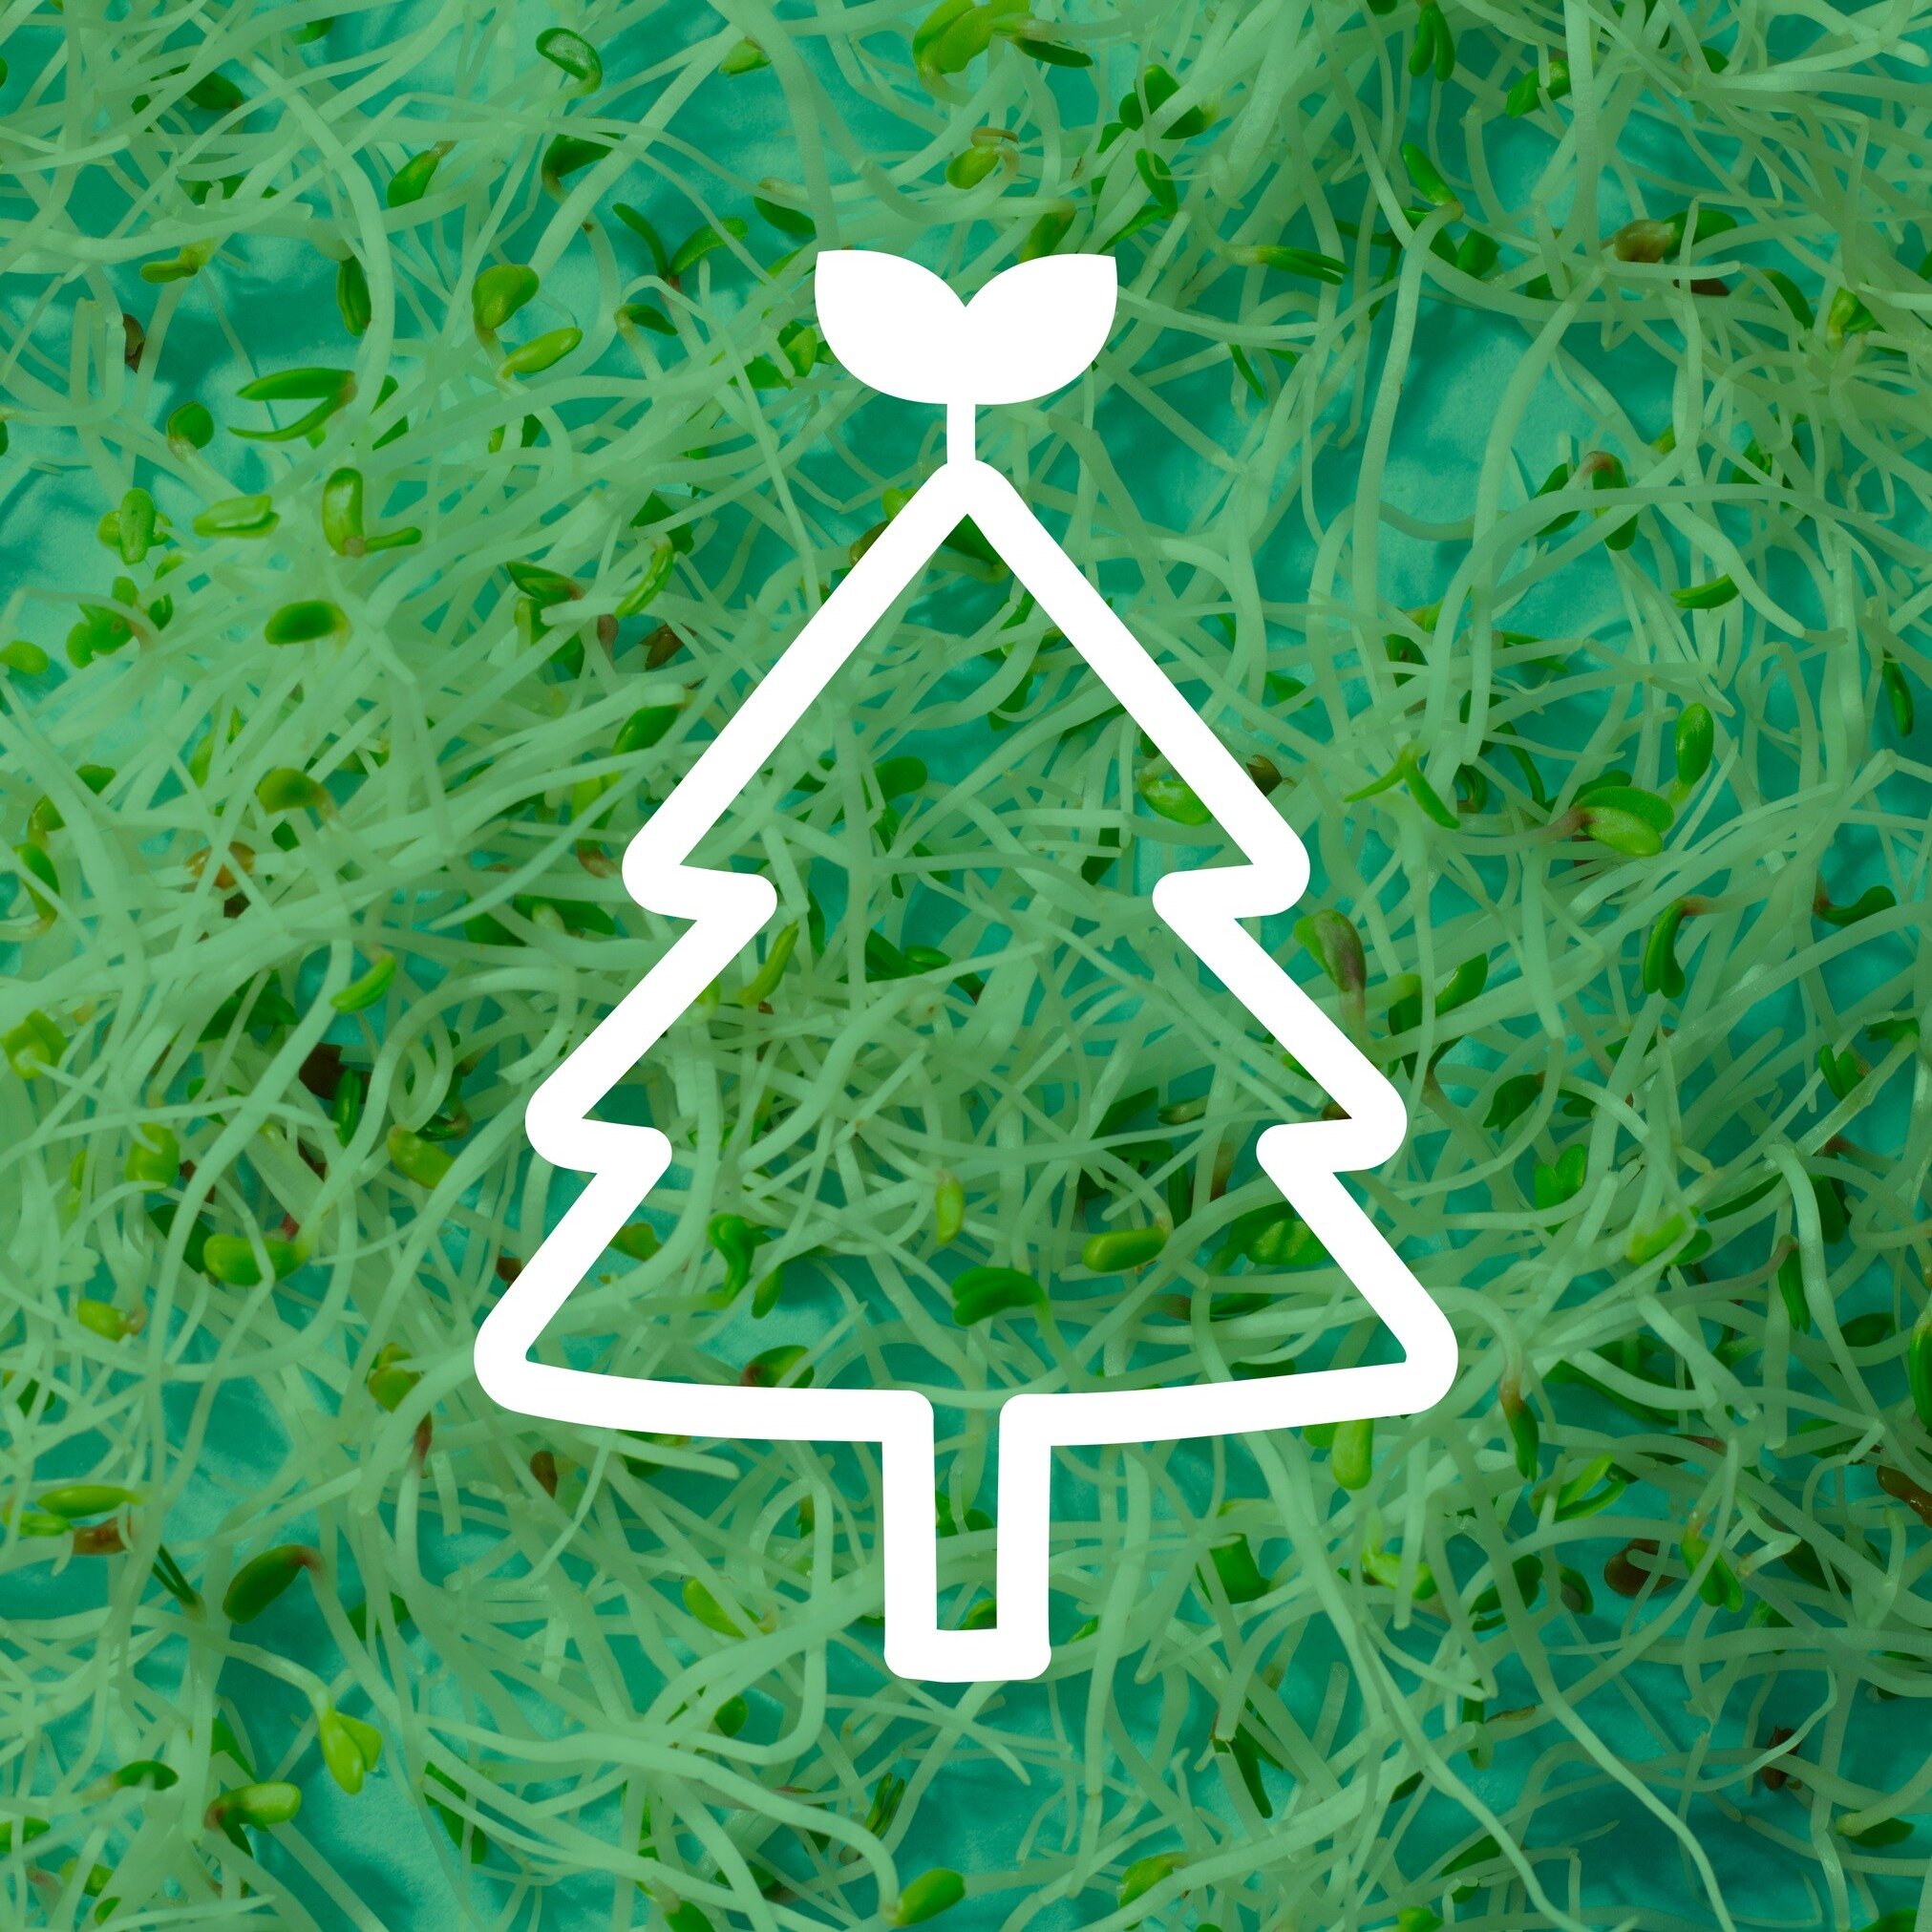 Have a very sprouty Christmas! From the Aussie family to yours&hellip; please stay safe and enjoy time spent with your loved ones. We&rsquo;ll see you back in 2024!
#sprouts #aussiesprouts #vegetarian